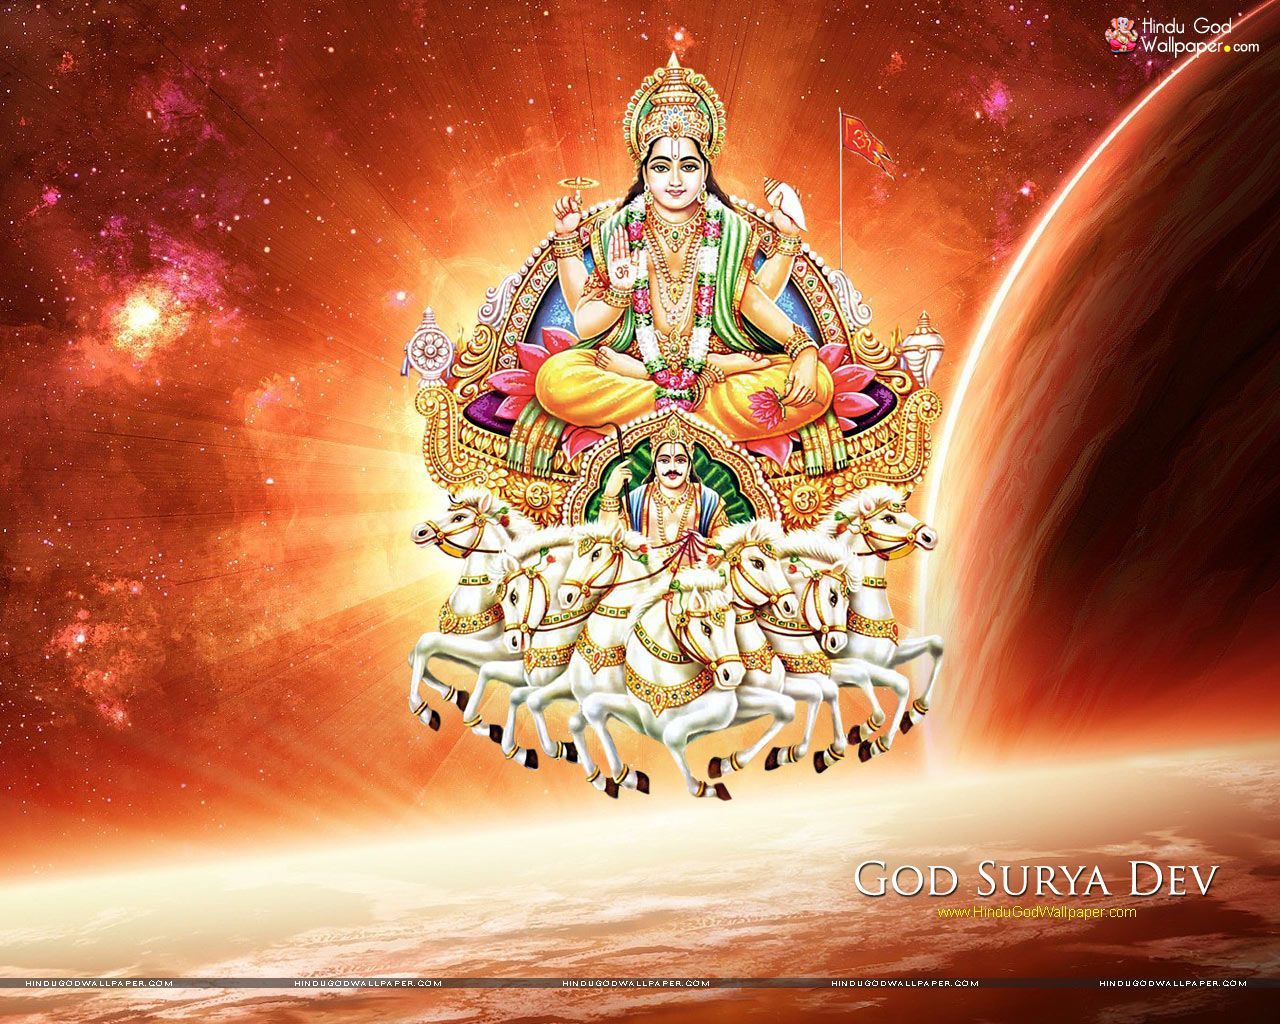 Free Lord Surya Dev Wallpaper download for desktop with HD full